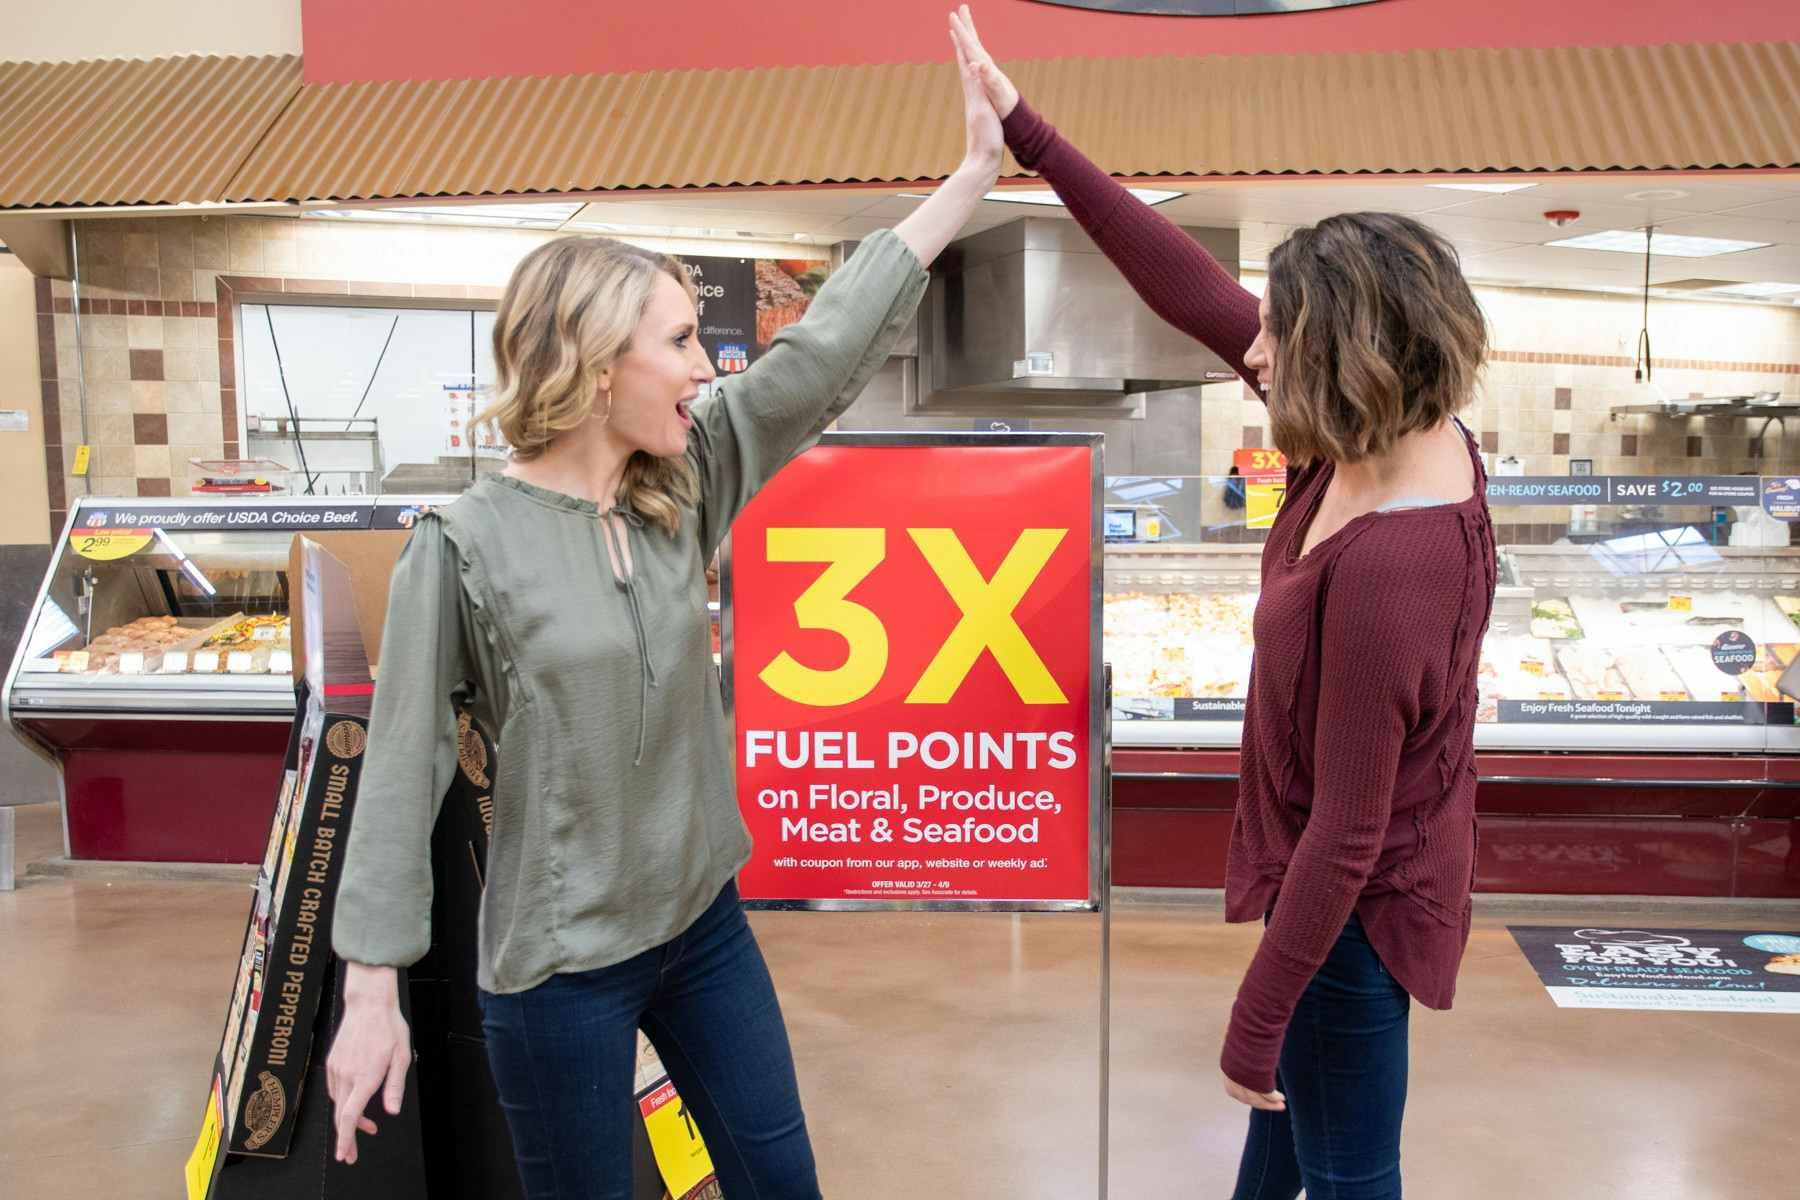 Buy gift cards at Kroger and earn up to 4 times the fuel points.